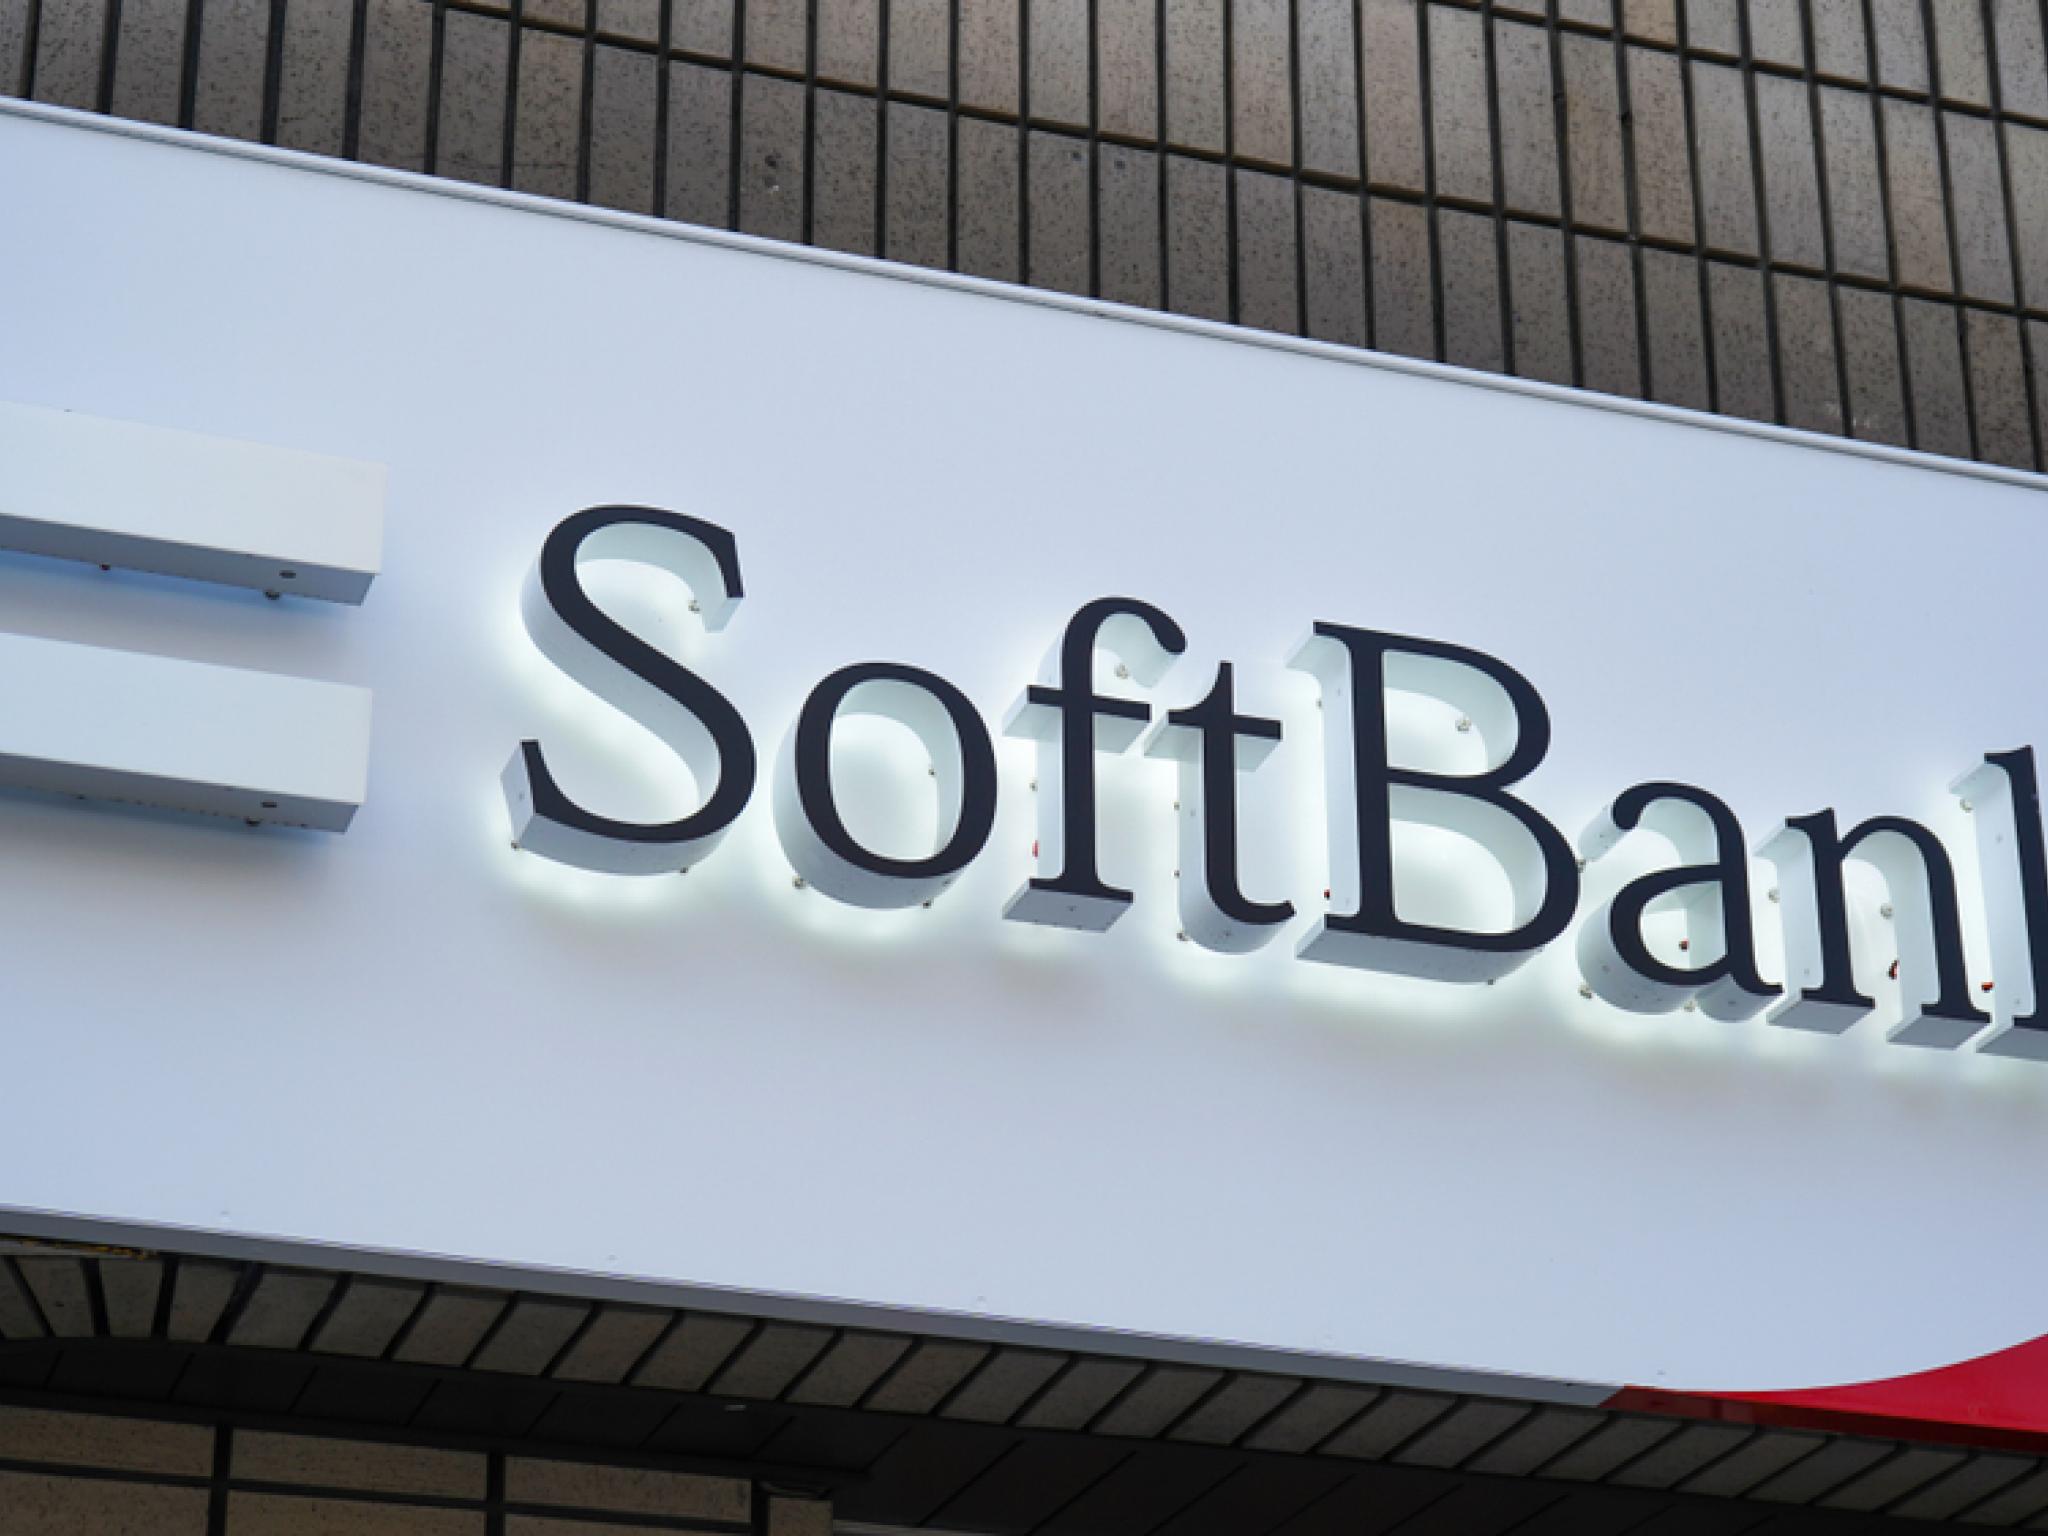  data-leak-in-masayoshi-sons-softbank-backed-internet-company-causes-strain-in-japan-south-korea-relations 